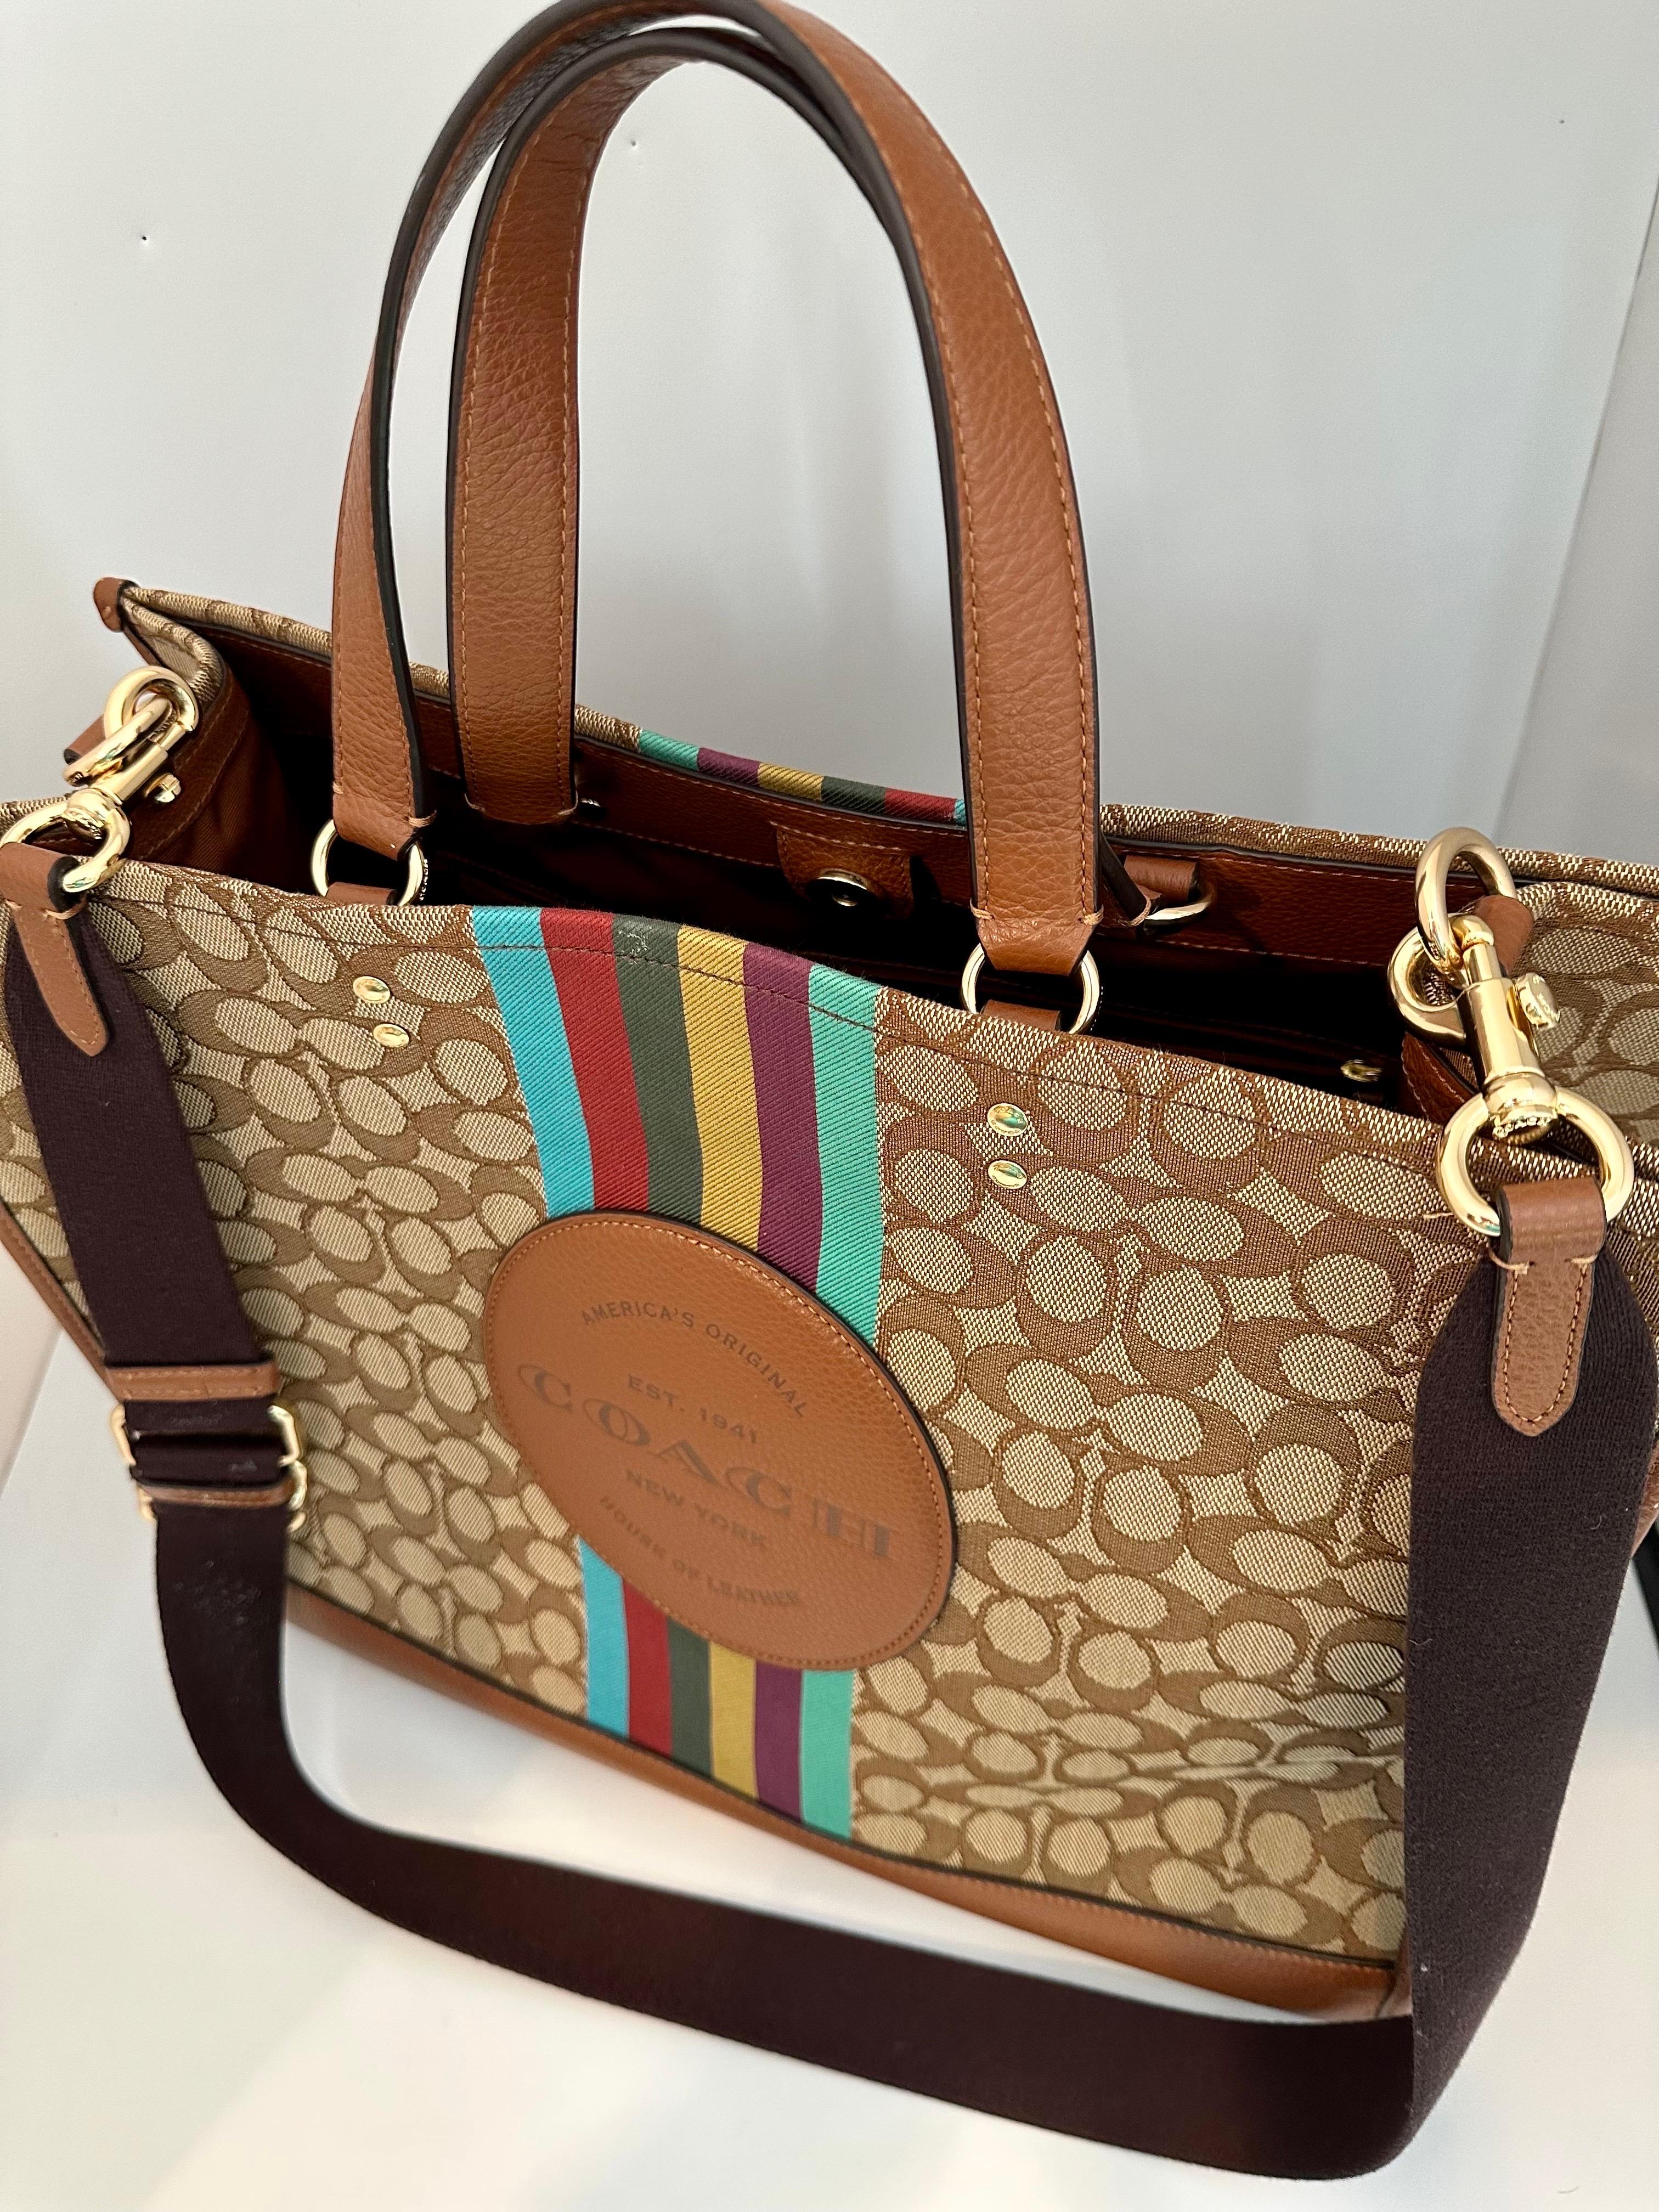 Huge Neverfull by Coach 
Good for traveling 
Signature jacquard and refined pebble leather
Inside zip, cell phone and multifunction pockets
Snap closure, fabric lining
Handles with 6